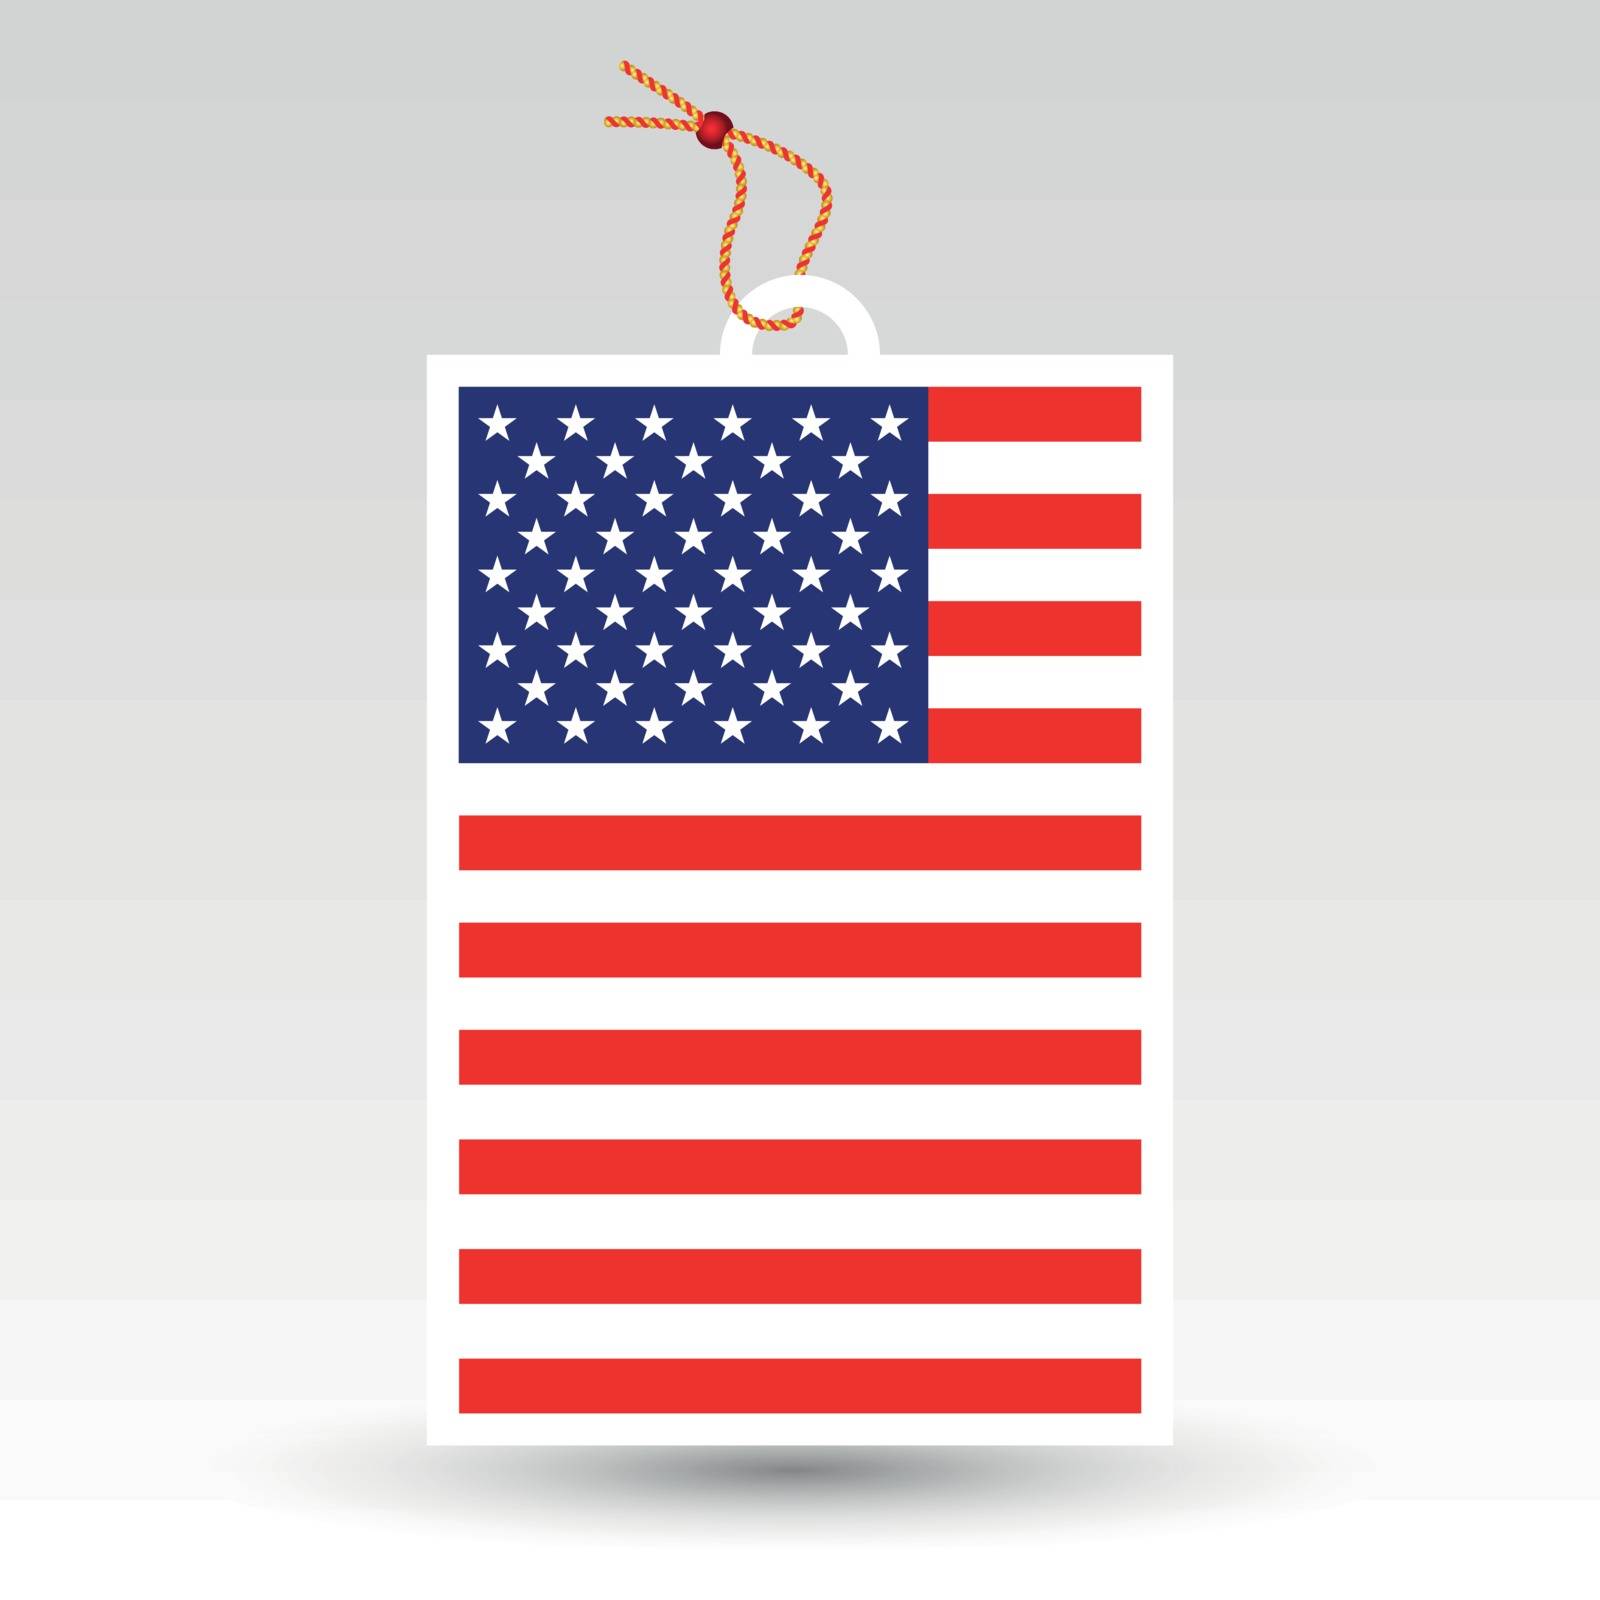 vector simple american price tag - symbol of made in usa - label with string - national flag pattern